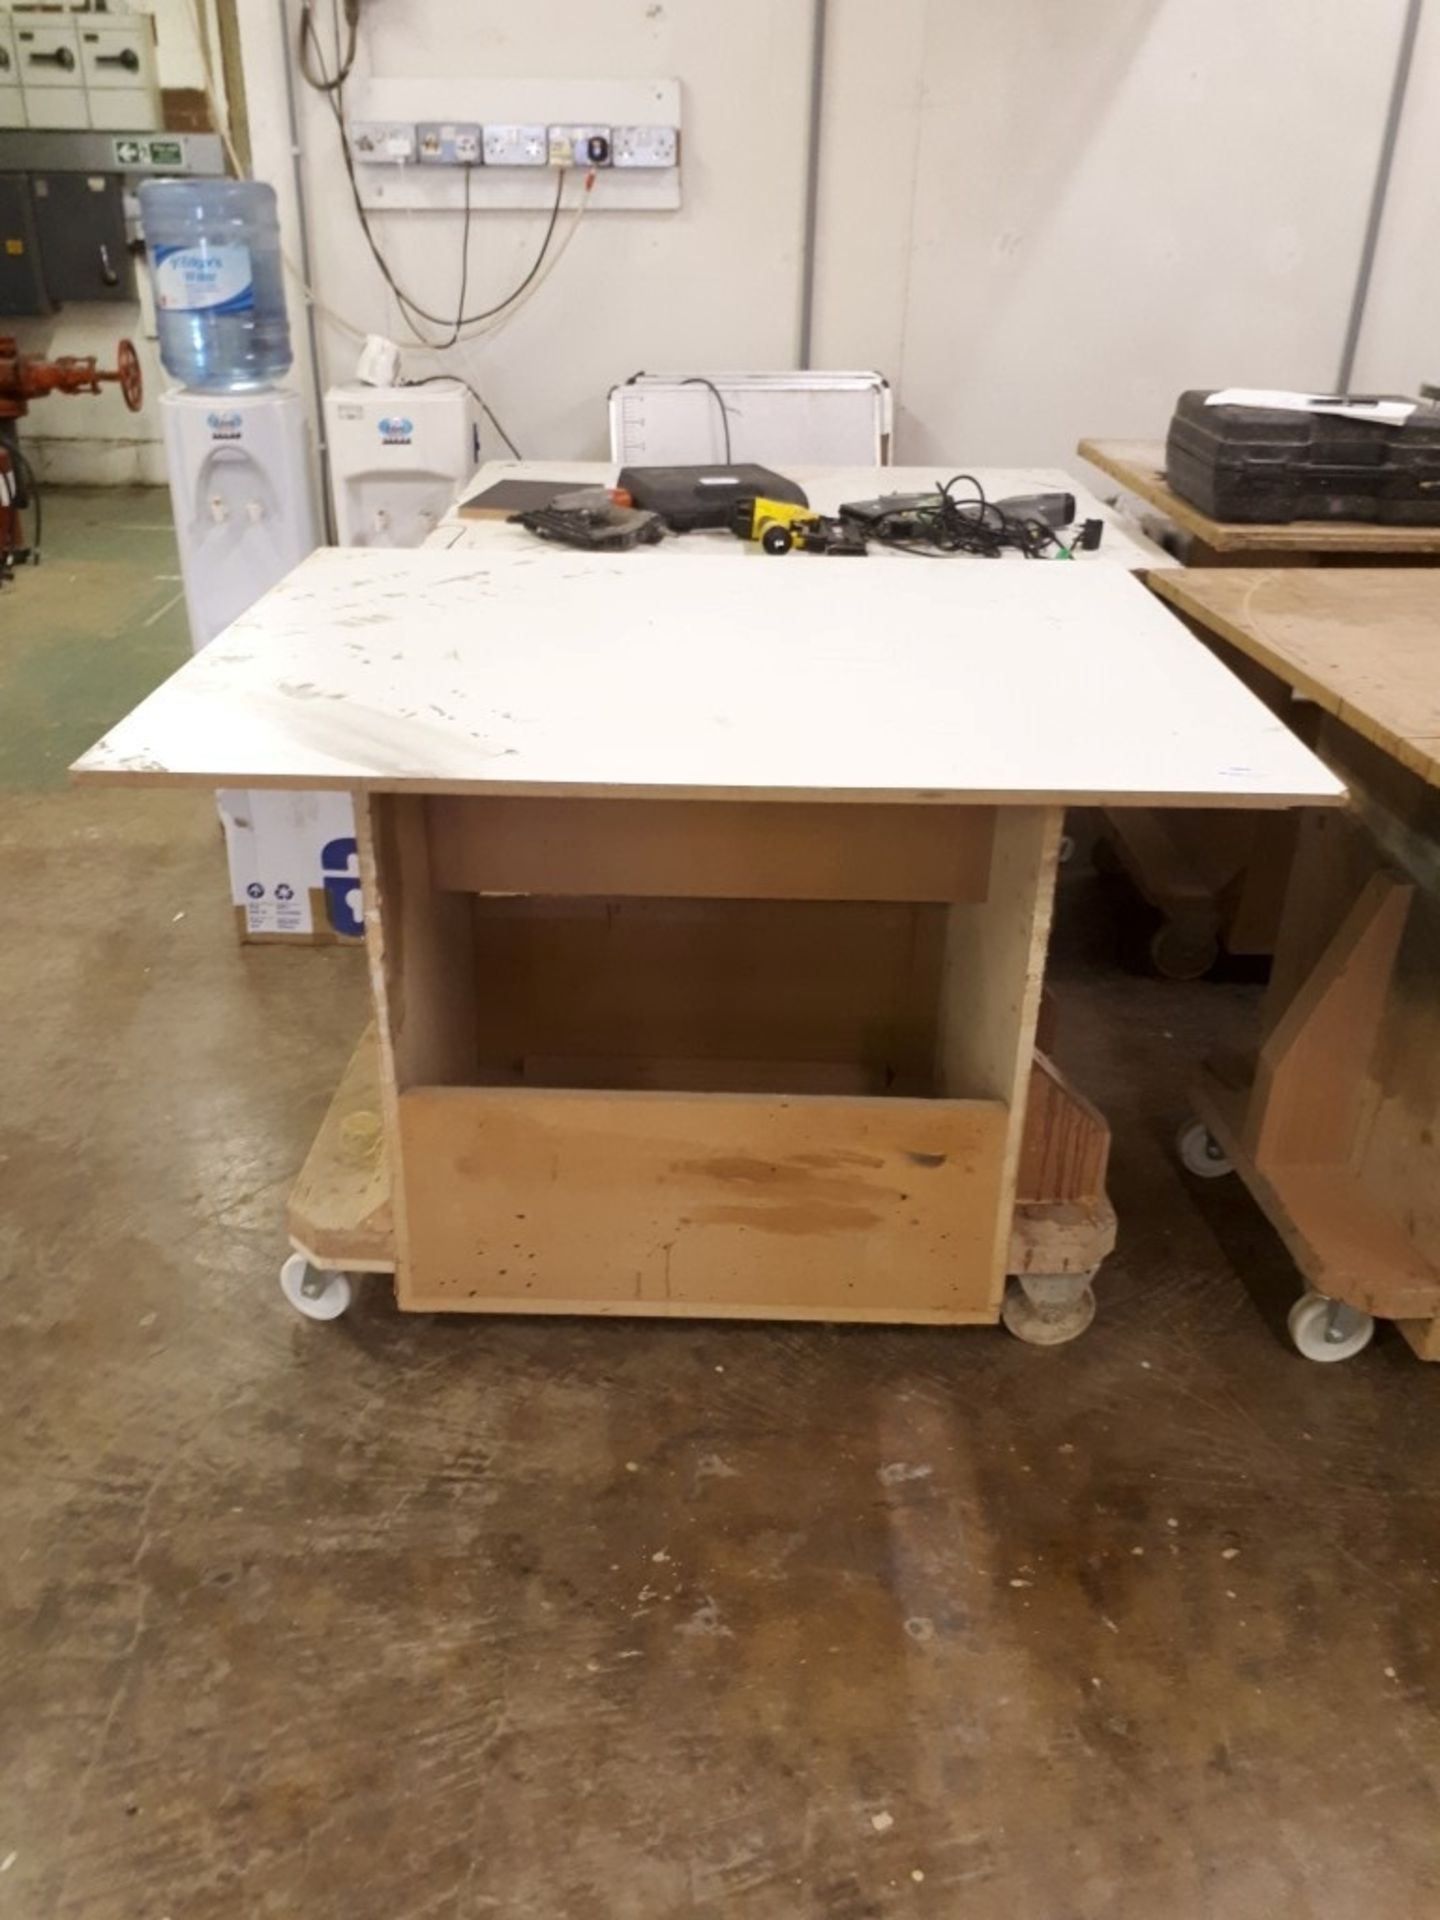 (2) Mobile workbenches